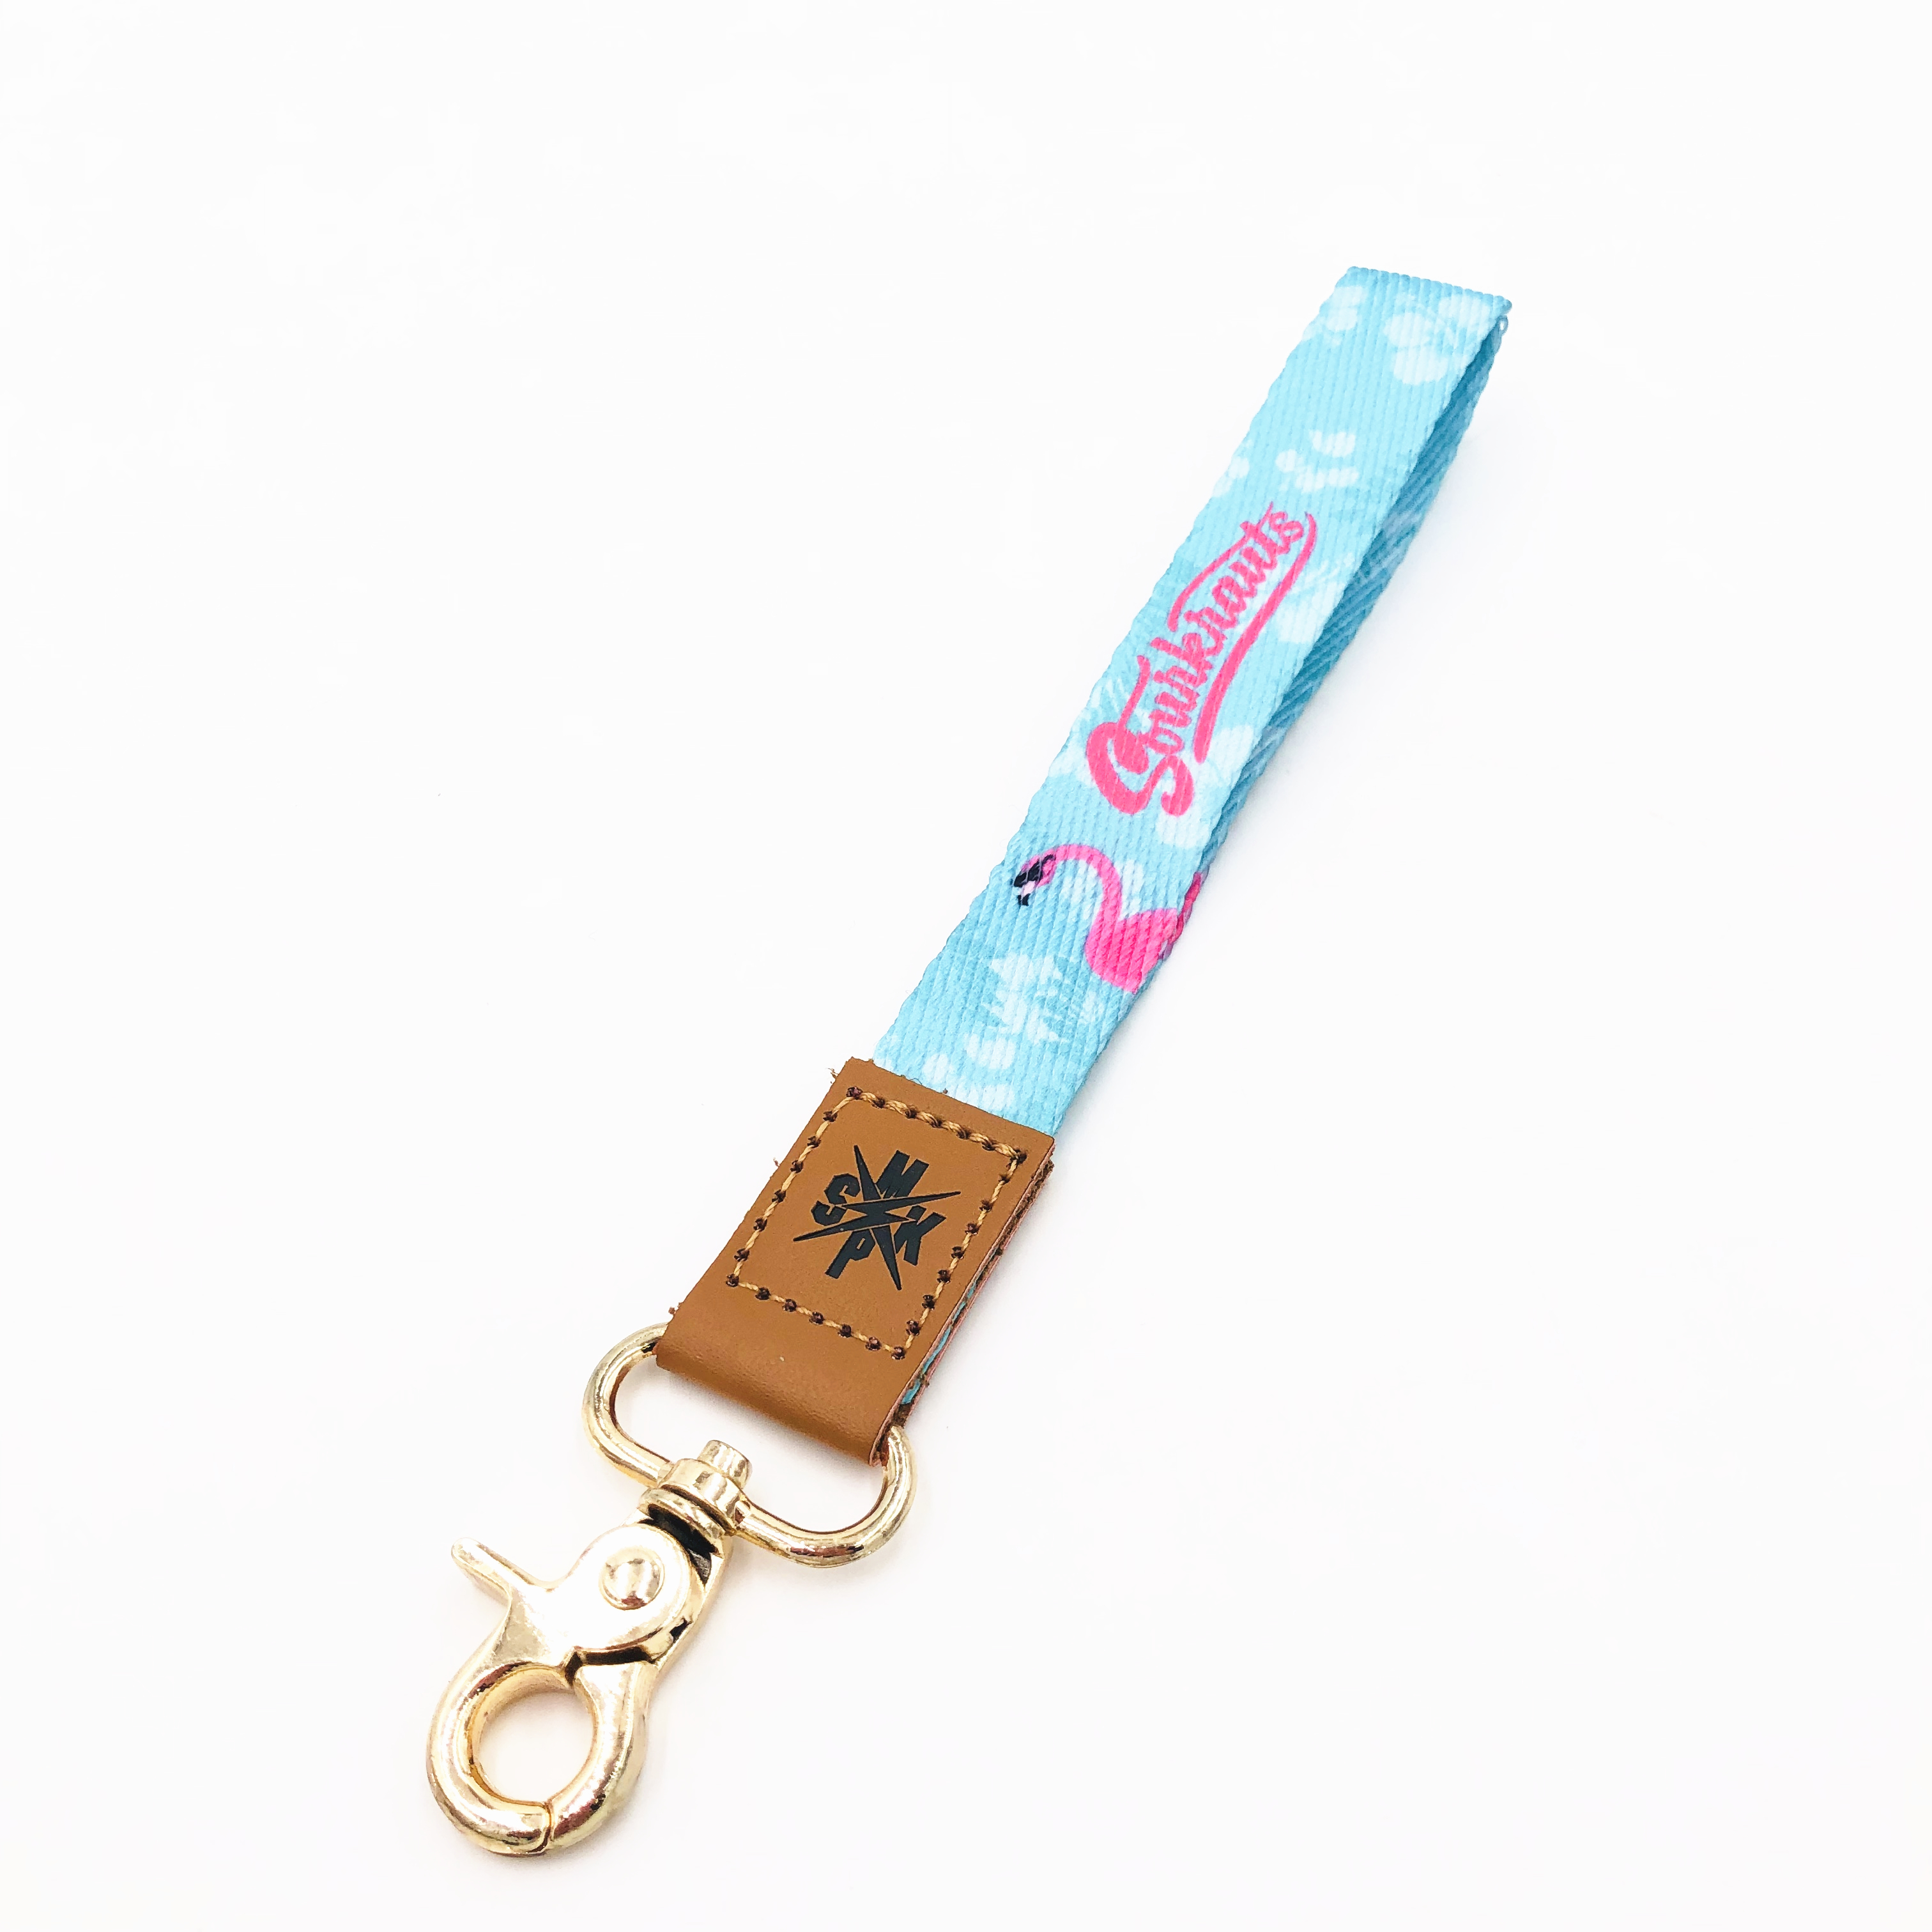 China Premium Quality Wristlet Strap with Metal Clasp and Genuine Leather  Hand Wrist Lanyard manufacturers and suppliers